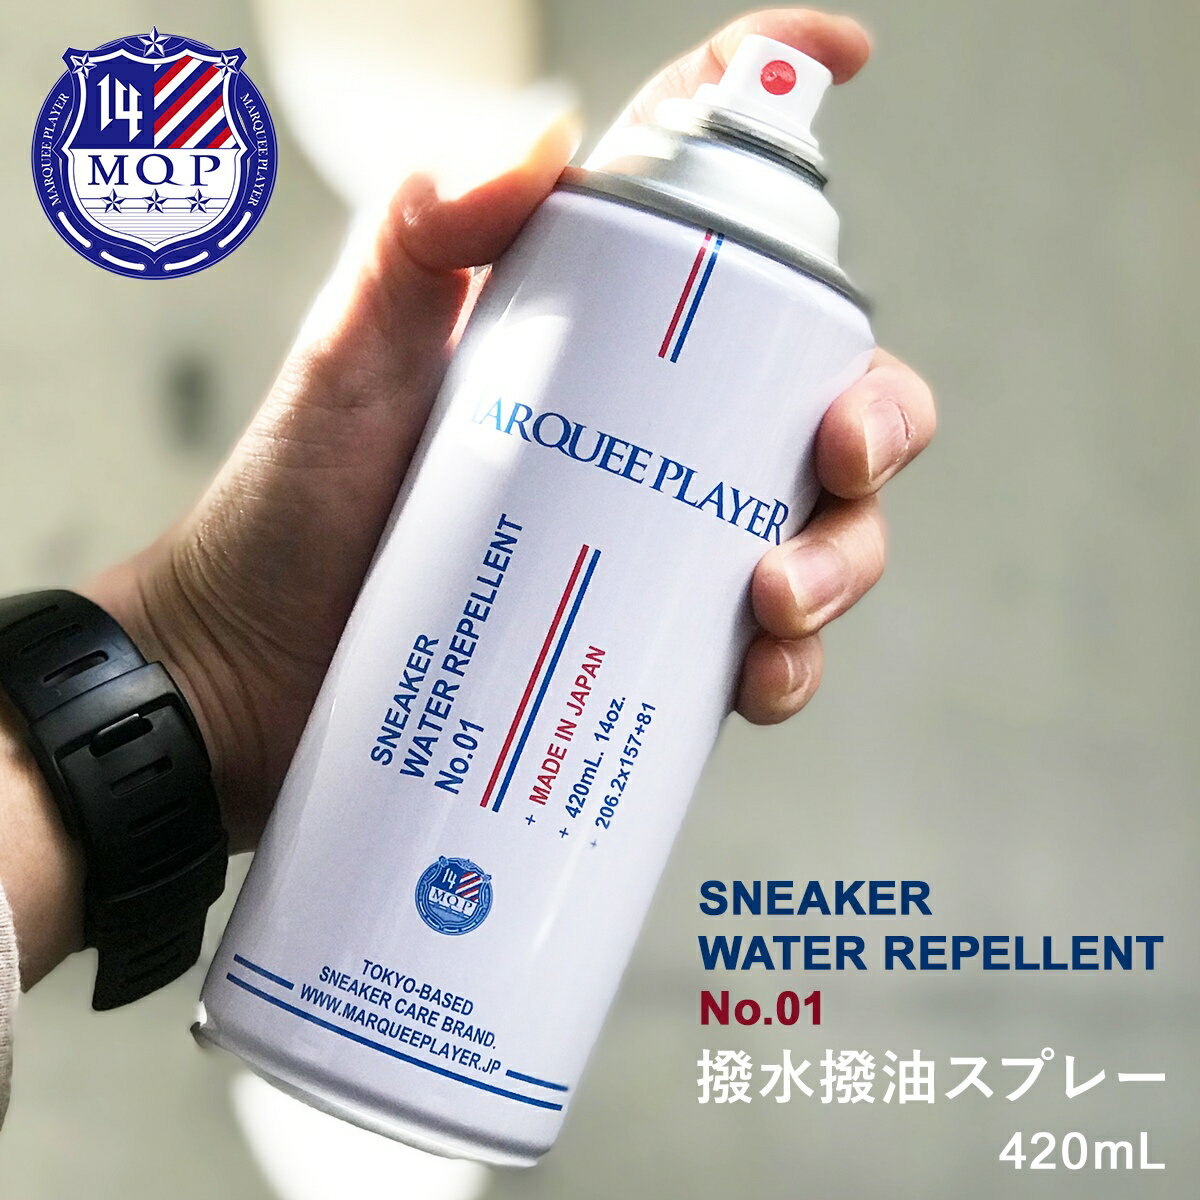 MARQUEE PLAYER SNEAKER WATER REPELLENT KEEPER No.01 マーキープレイヤー 防水スプレー 撥水 シューケア シューズケア 靴ケア用品 スニーカー 靴 ケア 撥油 MP005 【海外配送不可】